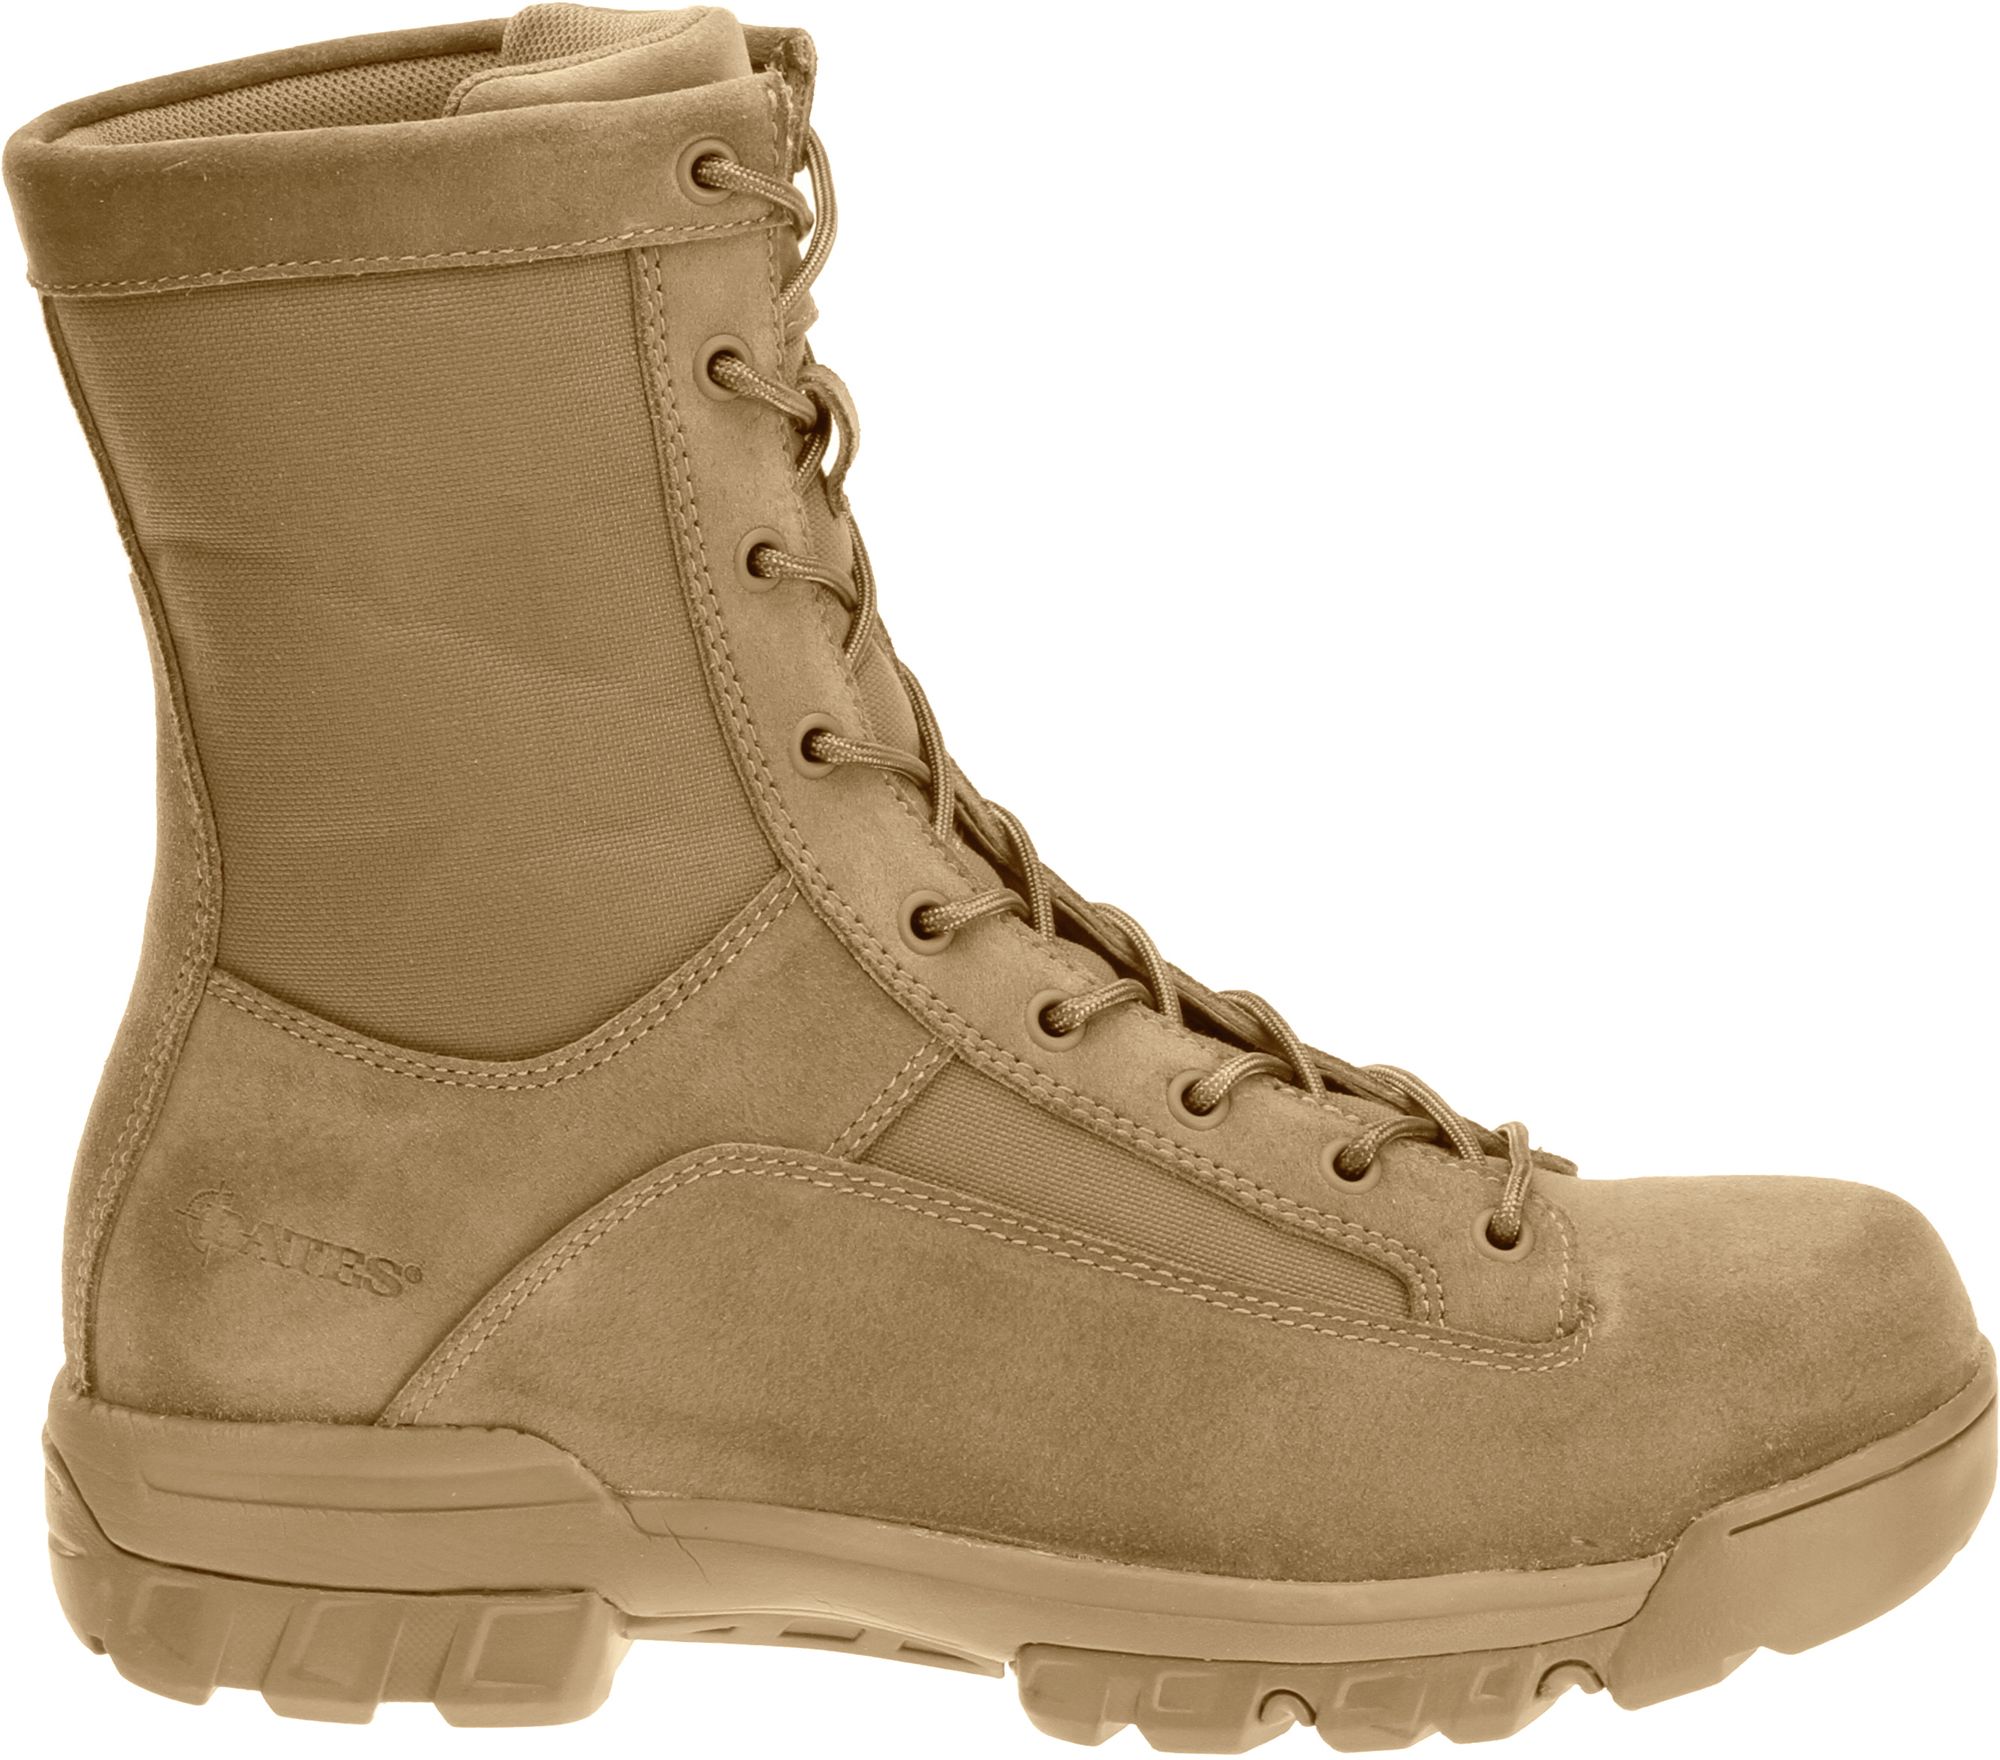 Tactical Boots | Best Price Guarantee at DICK'S